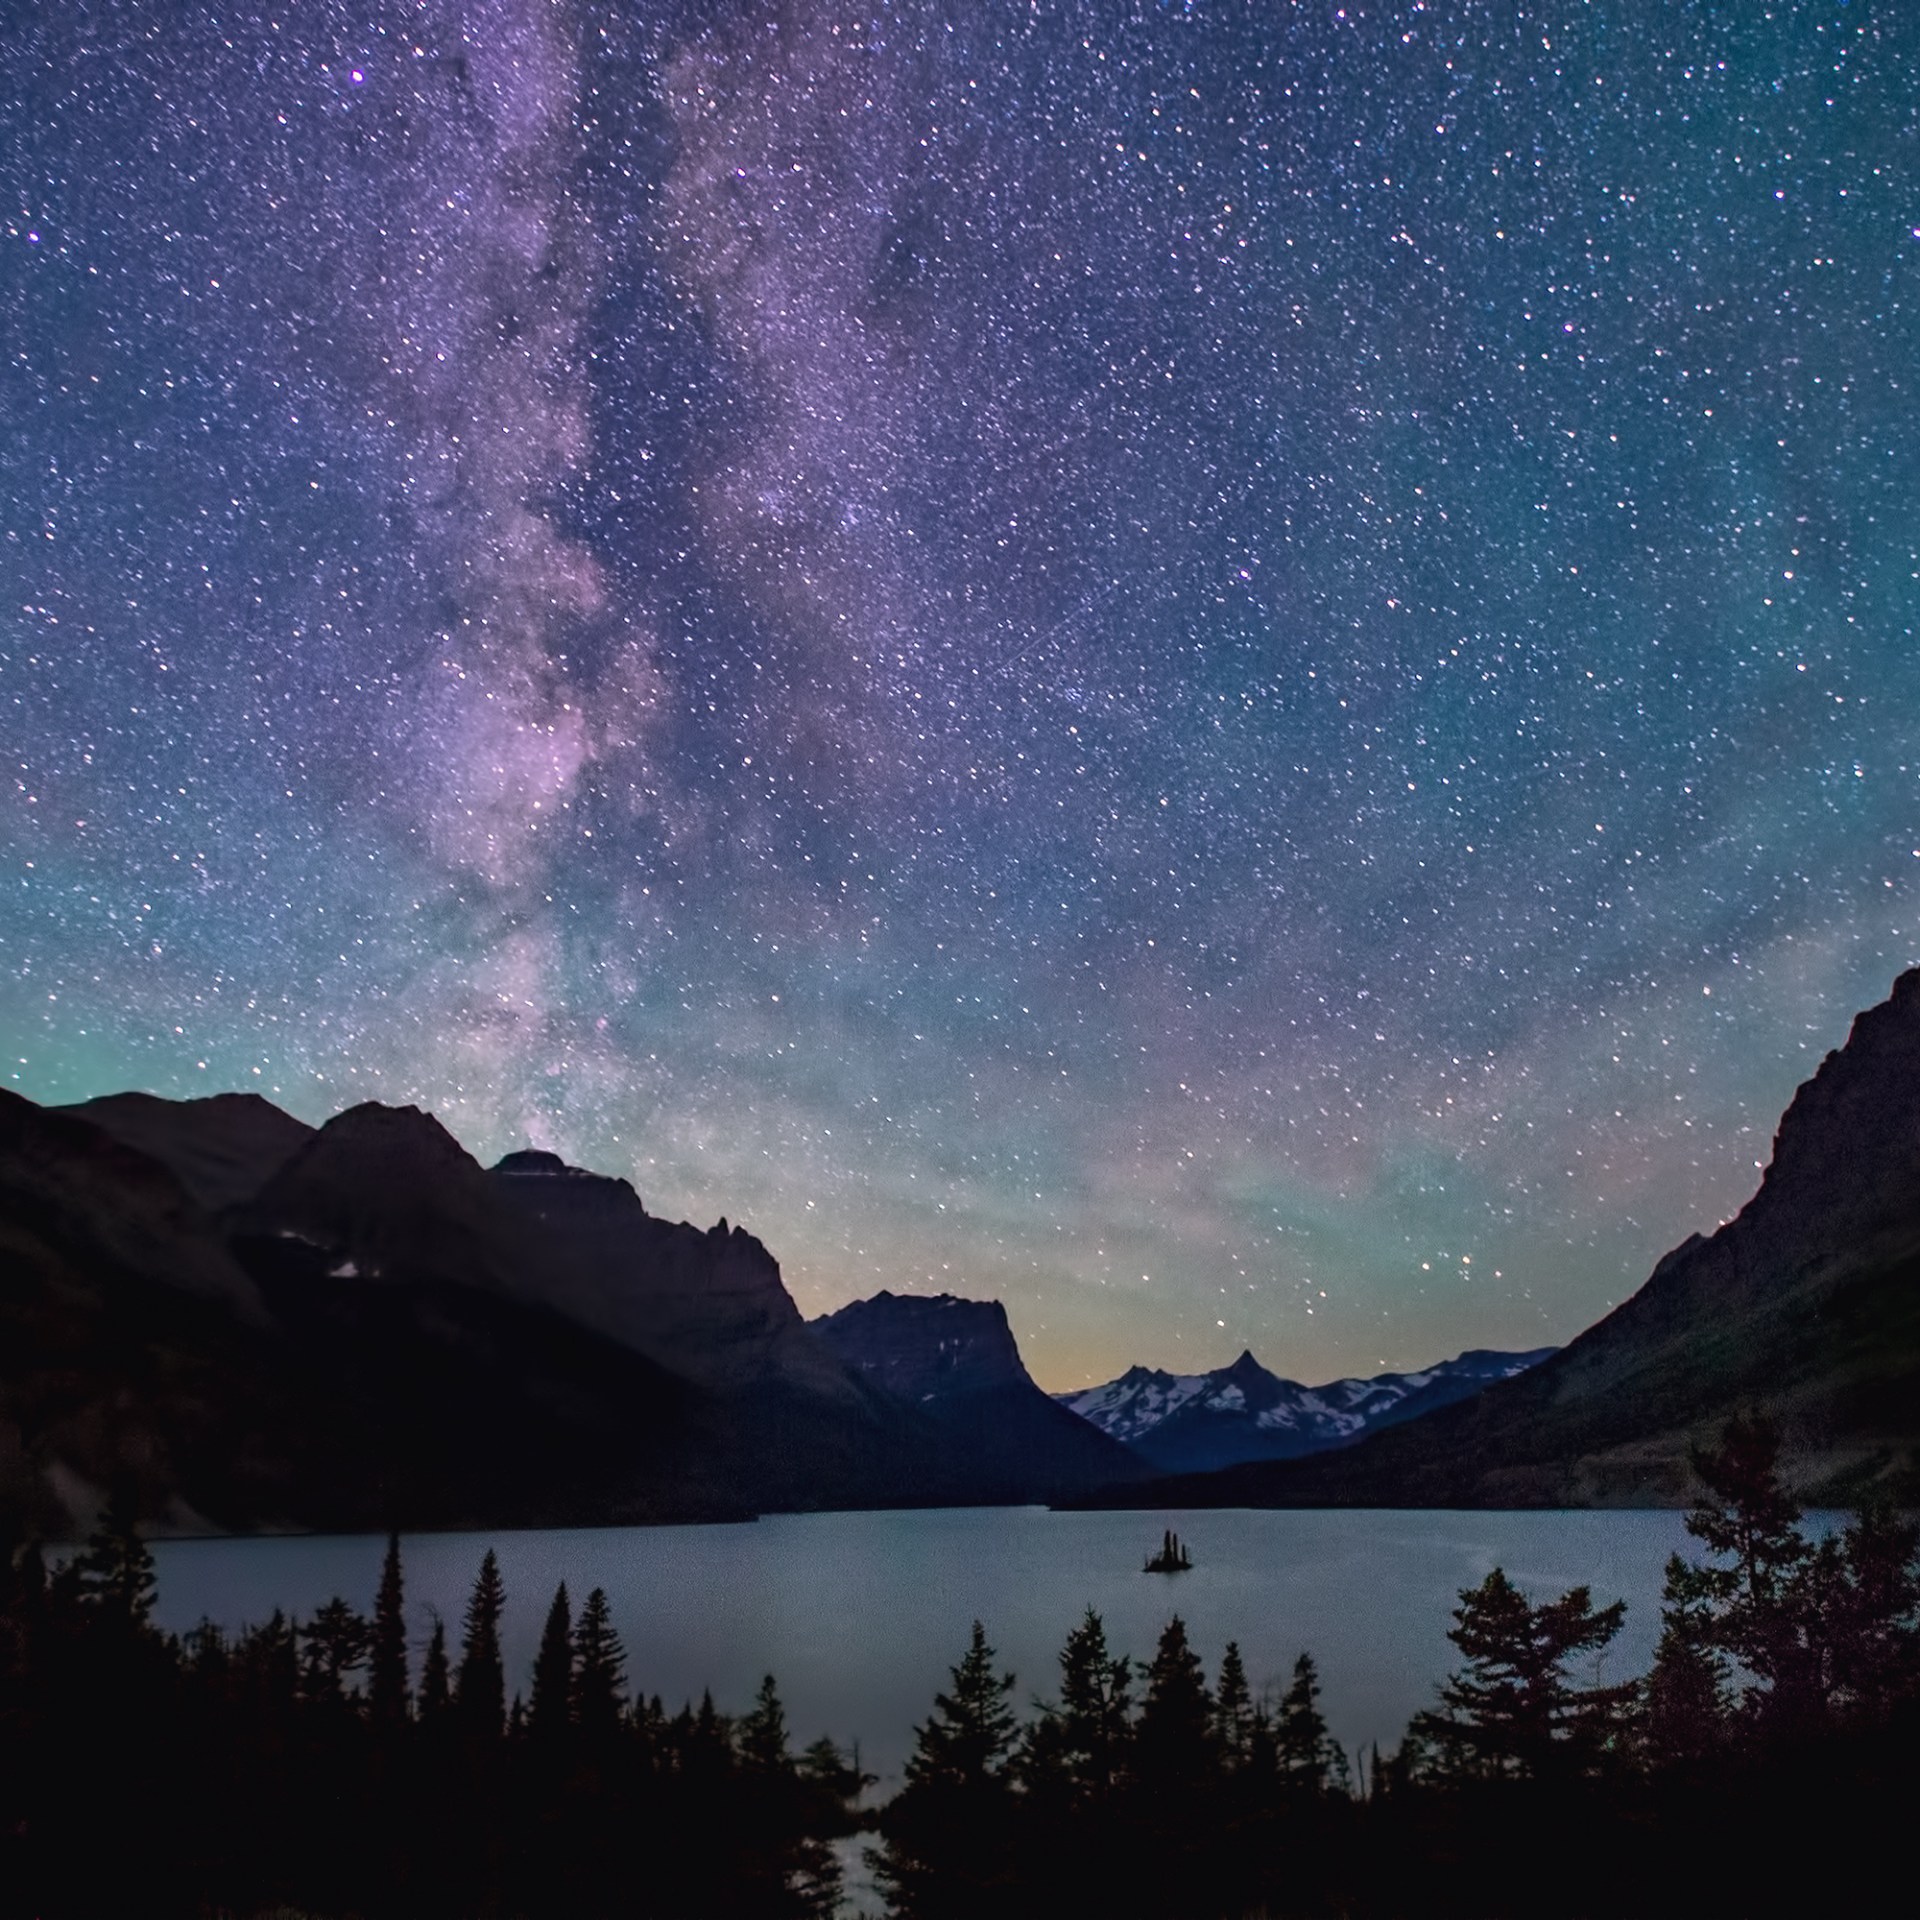 milky way above saint mary lake in glacier national park, montana - Photo Credit: FloridaStock/Shutterstock